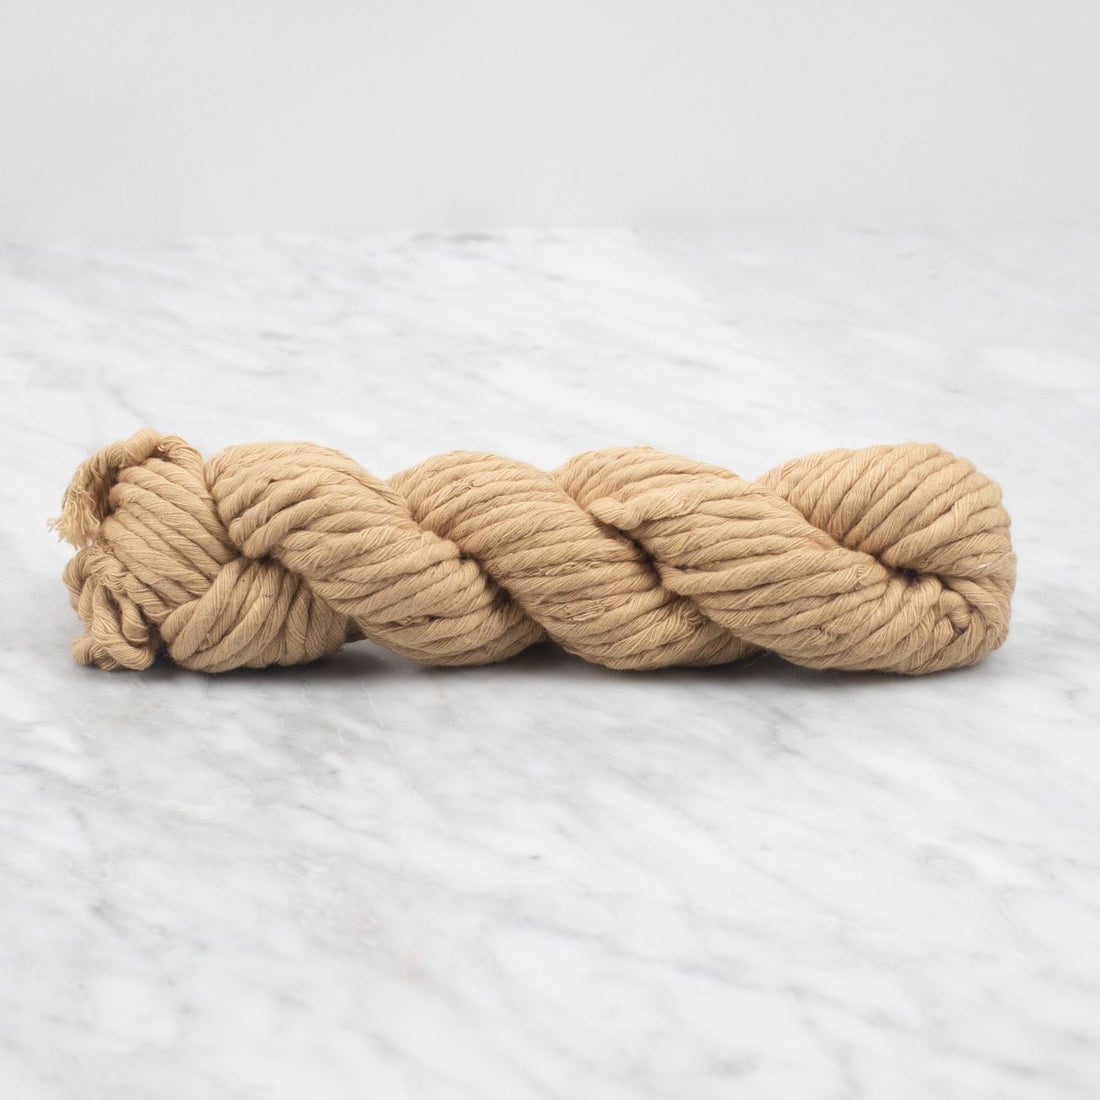 5mm Hand-Dyed Cotton String - Antique Copper - 100 grams